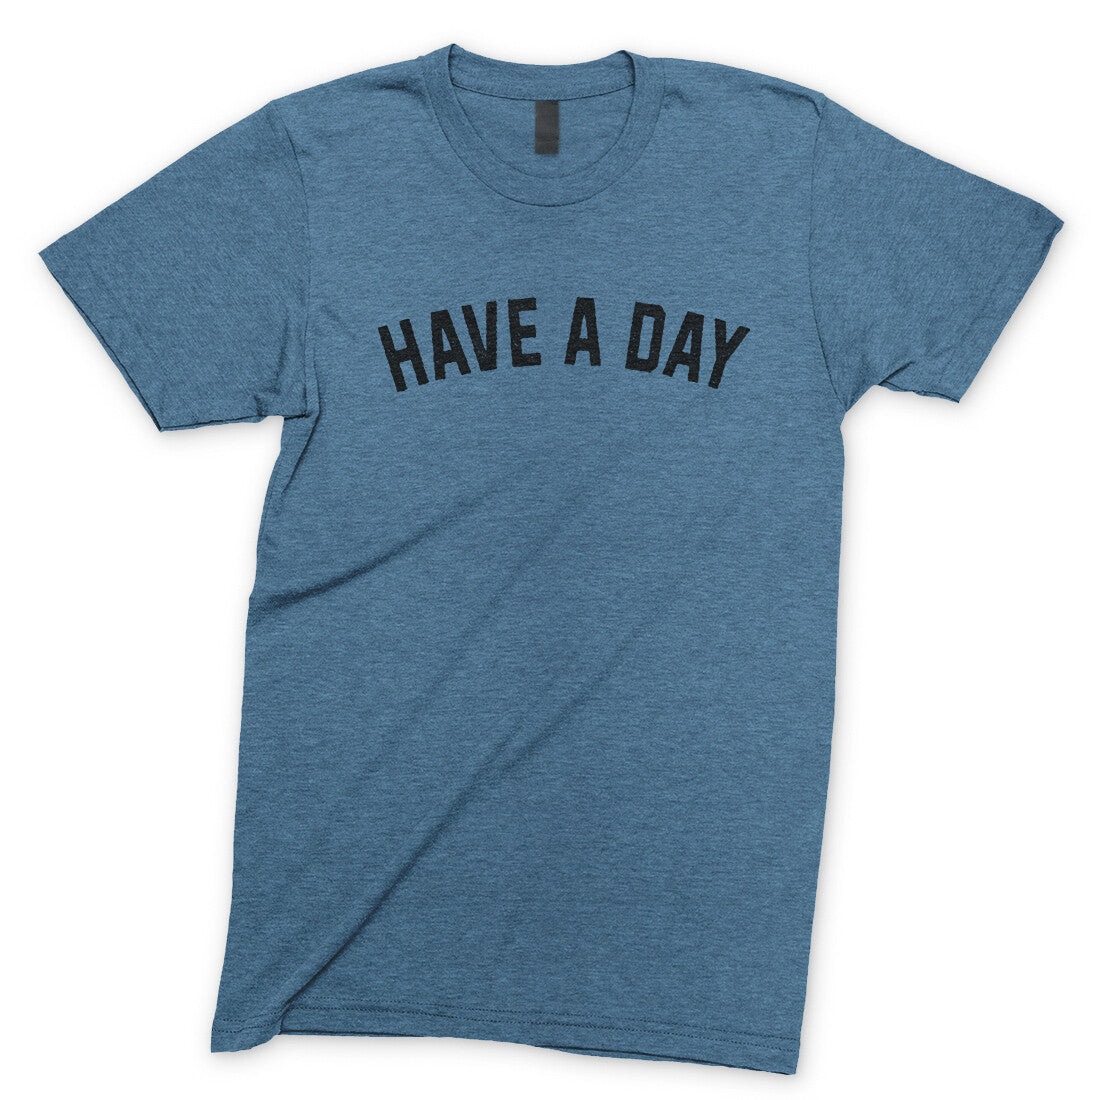 Have a Day in Heather Indigo Color